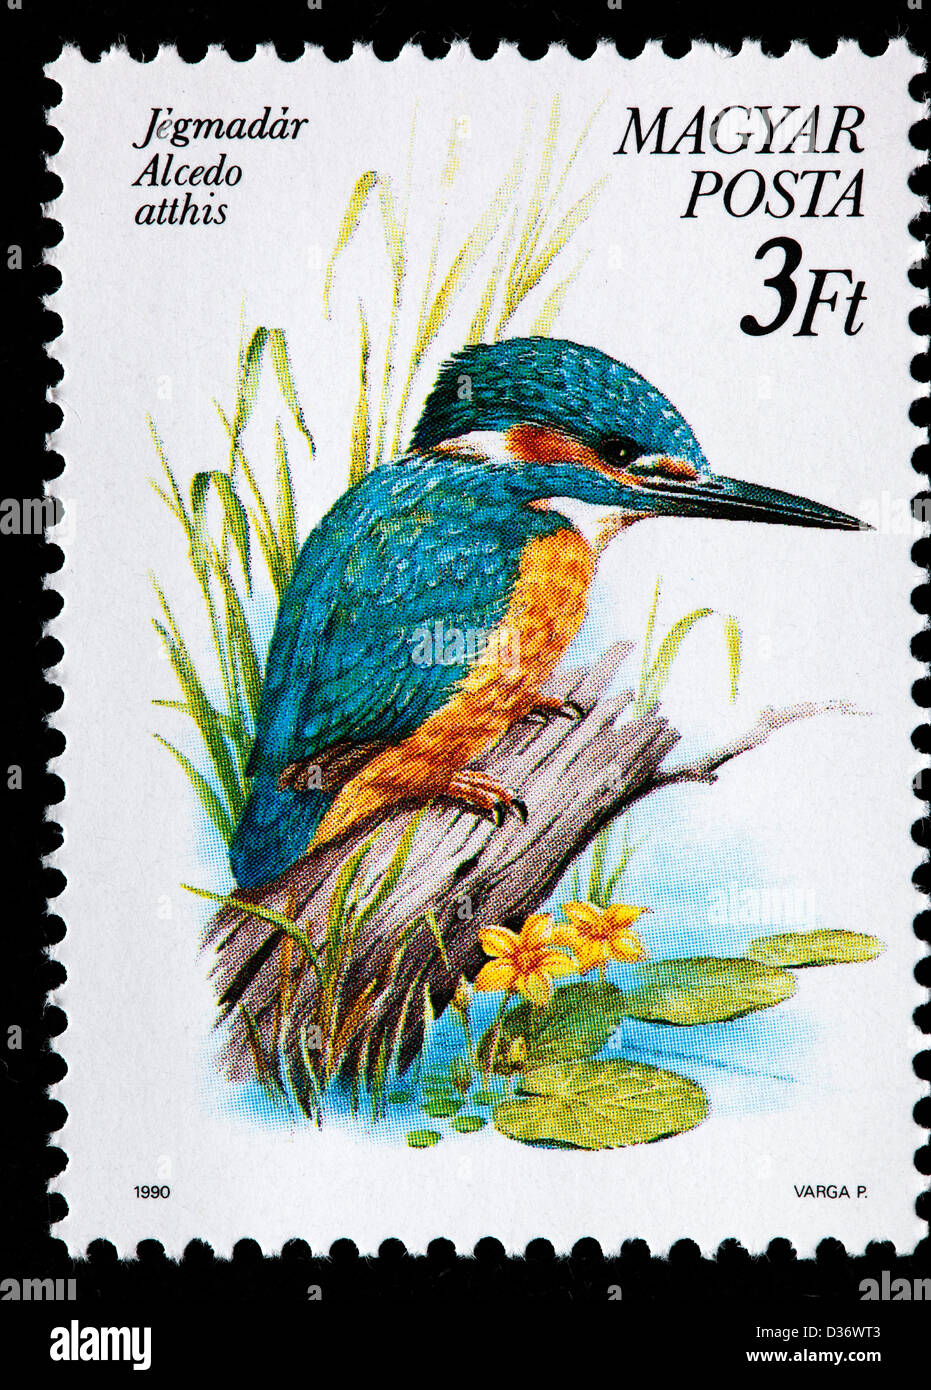 Eurasian Kingfisher or River Kingfisher (Alcedo atthis), postage stamp, Hungary, 1990 Stock Photo